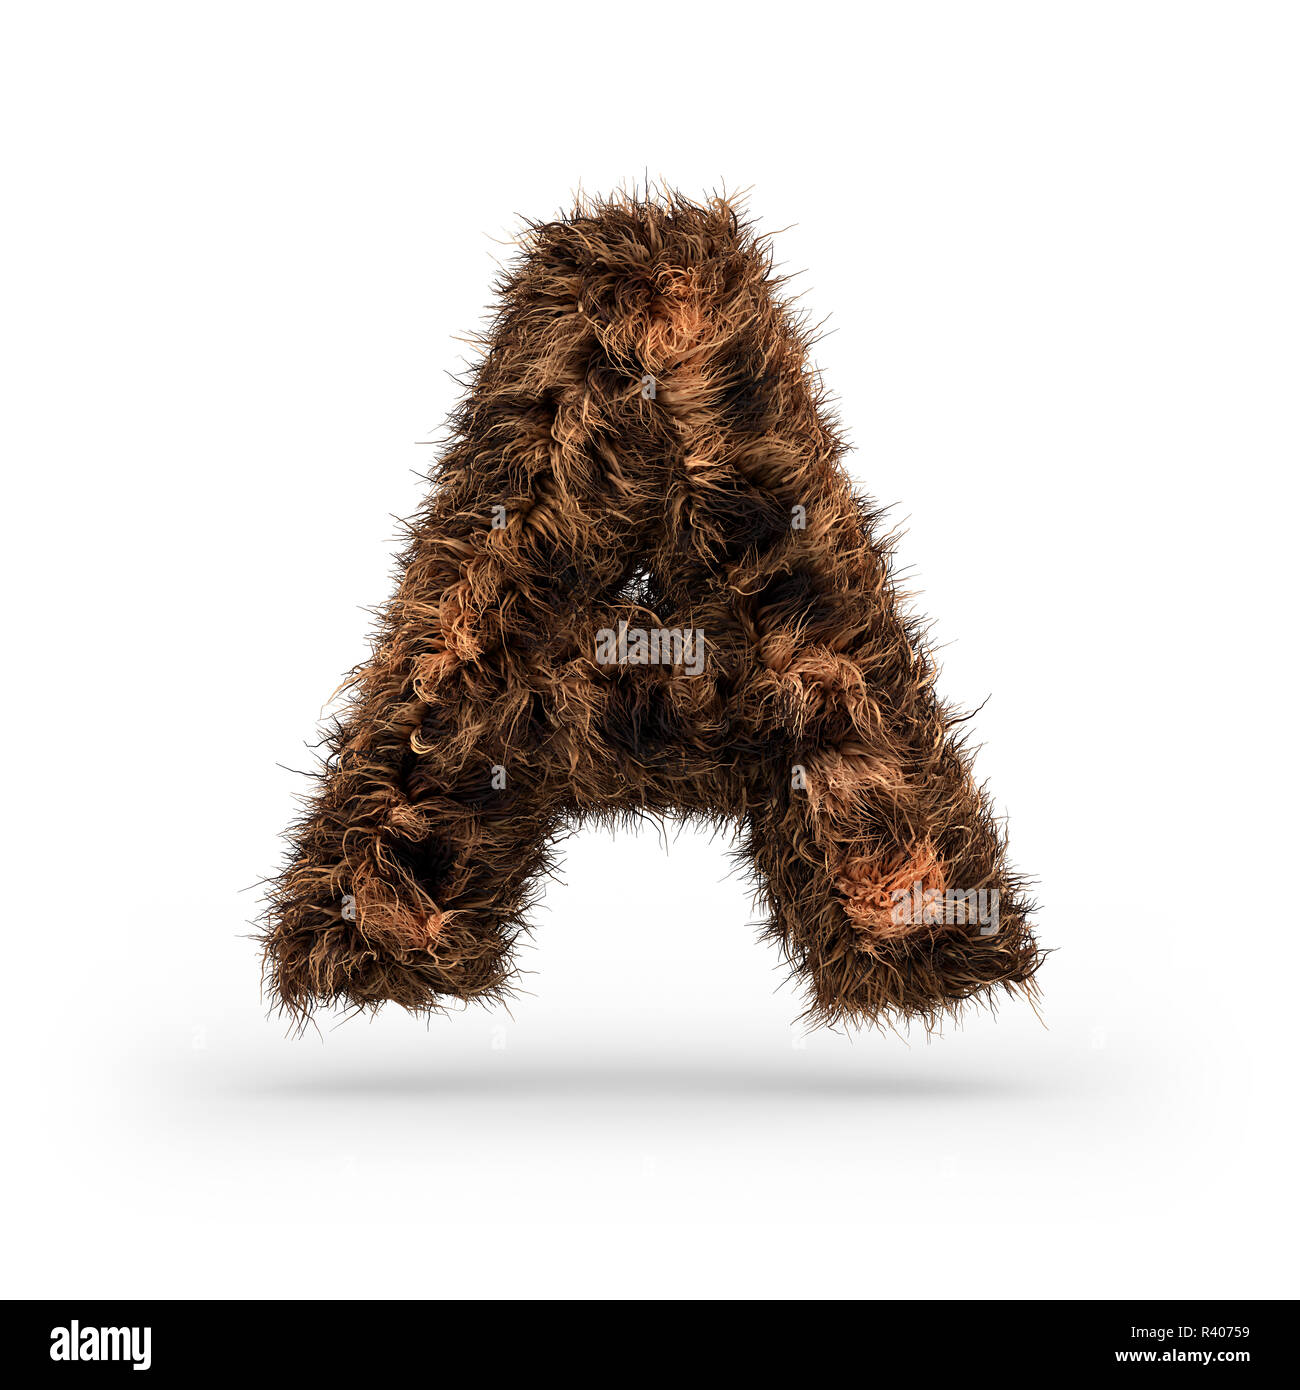 Uppercase fluffy and furry font made of fur texture for poster printing, branding, advertising. Letter A. 3D rendering Stock Photo